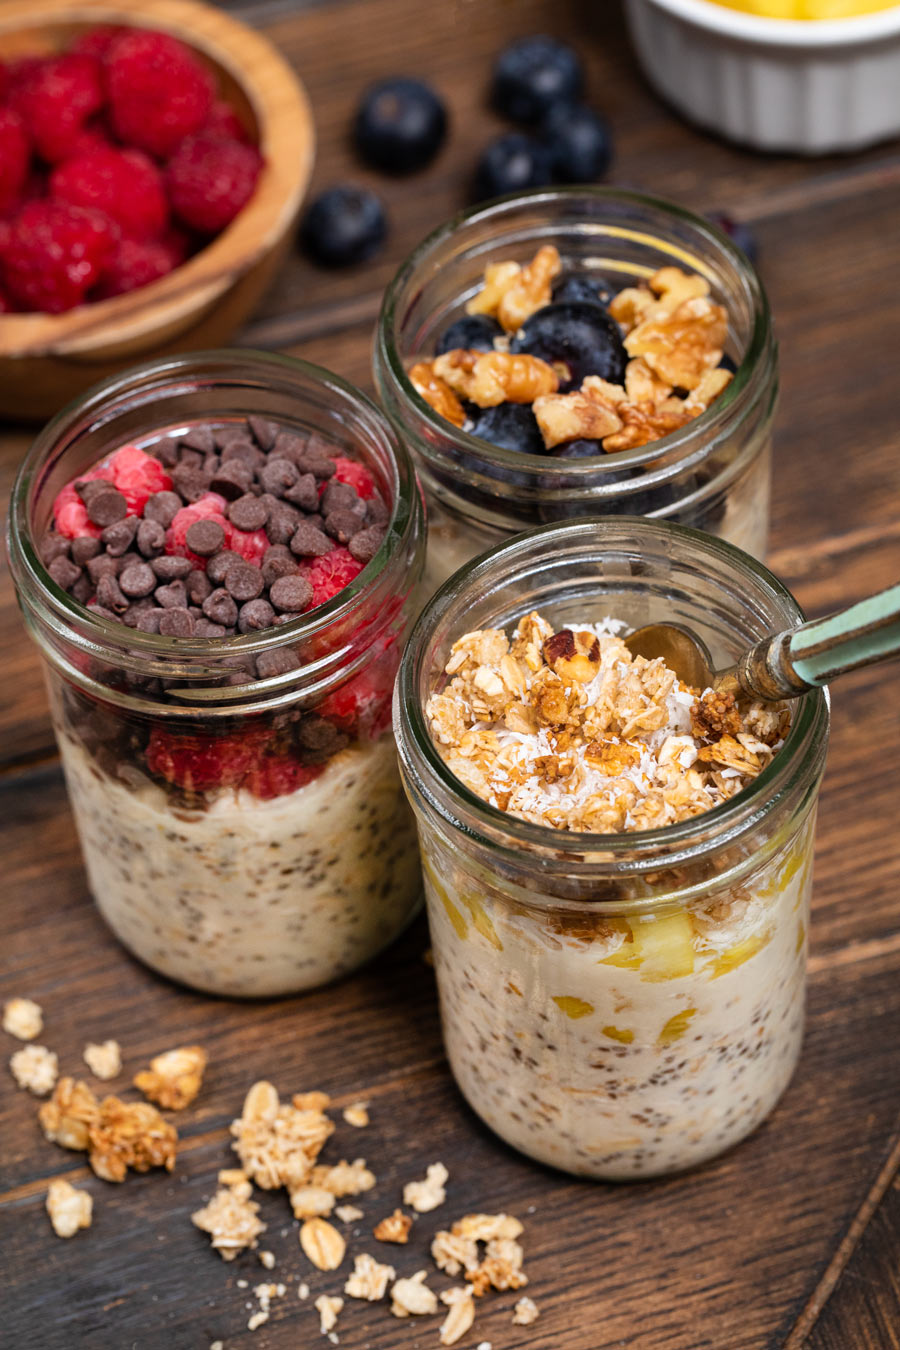 Overnight oats with toppings like raspberries, chocolate chips, granola, blueberries, and granola